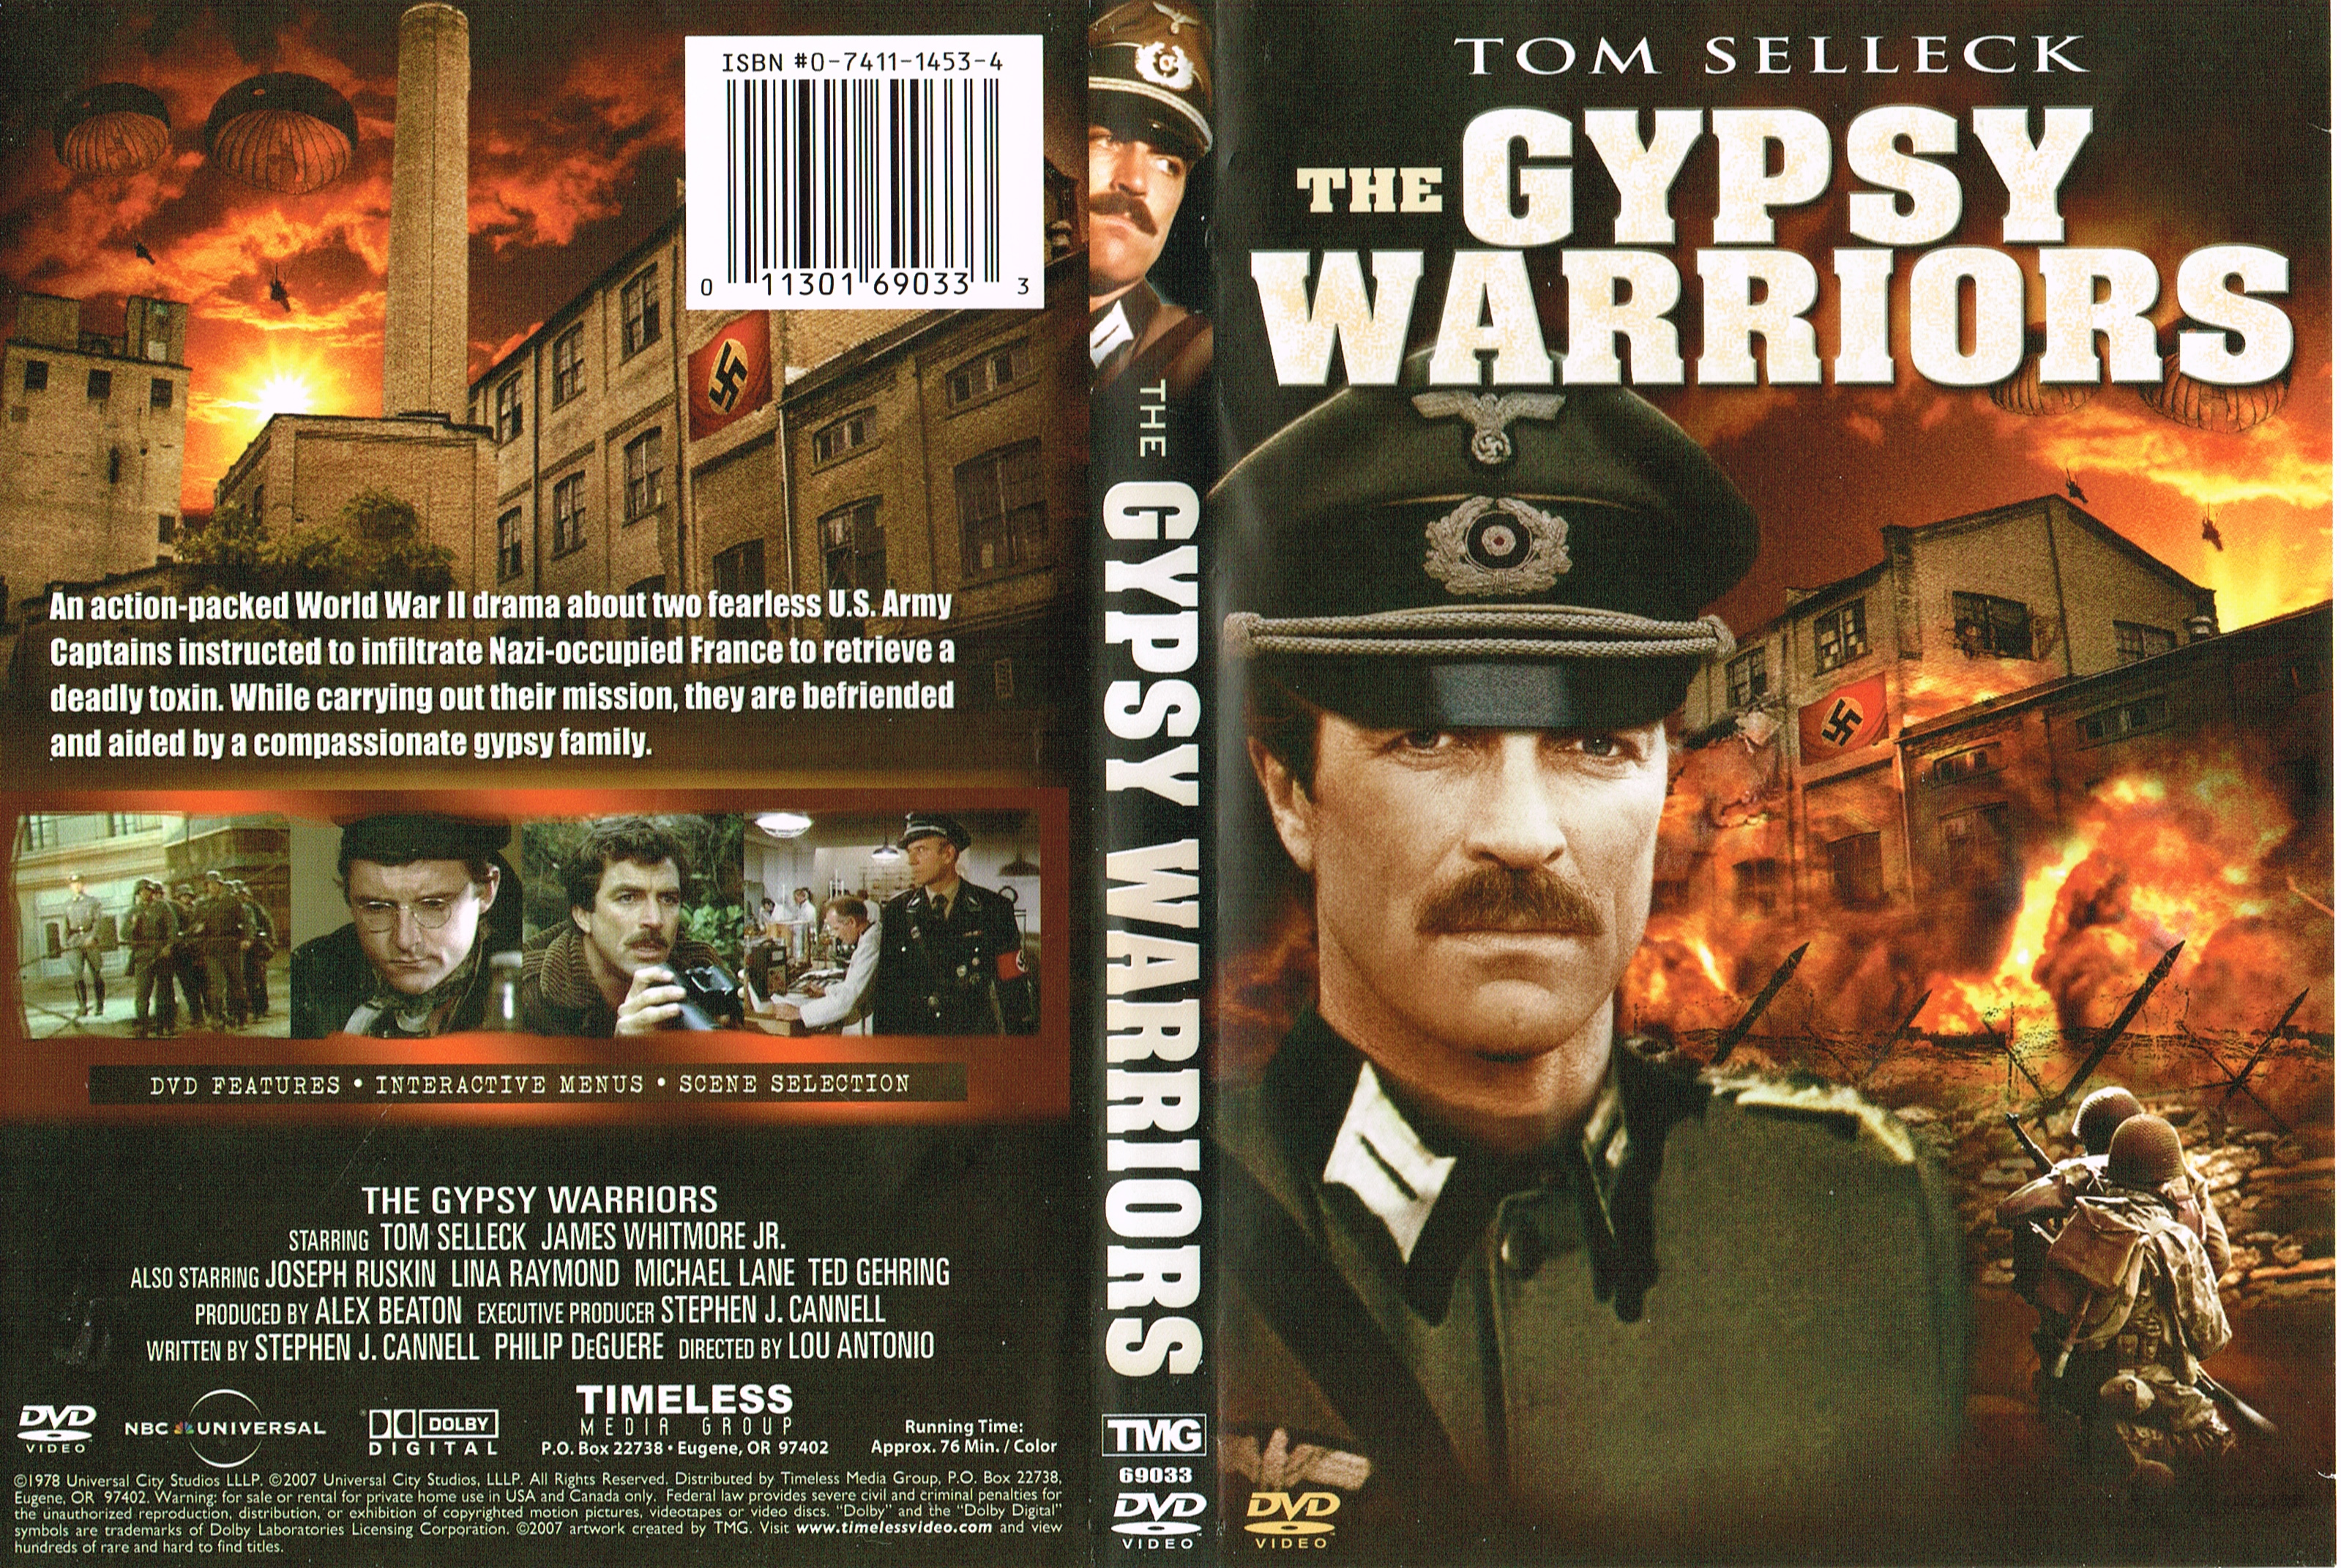 Jaquette DVD The Gypsy Warriors Zone 1